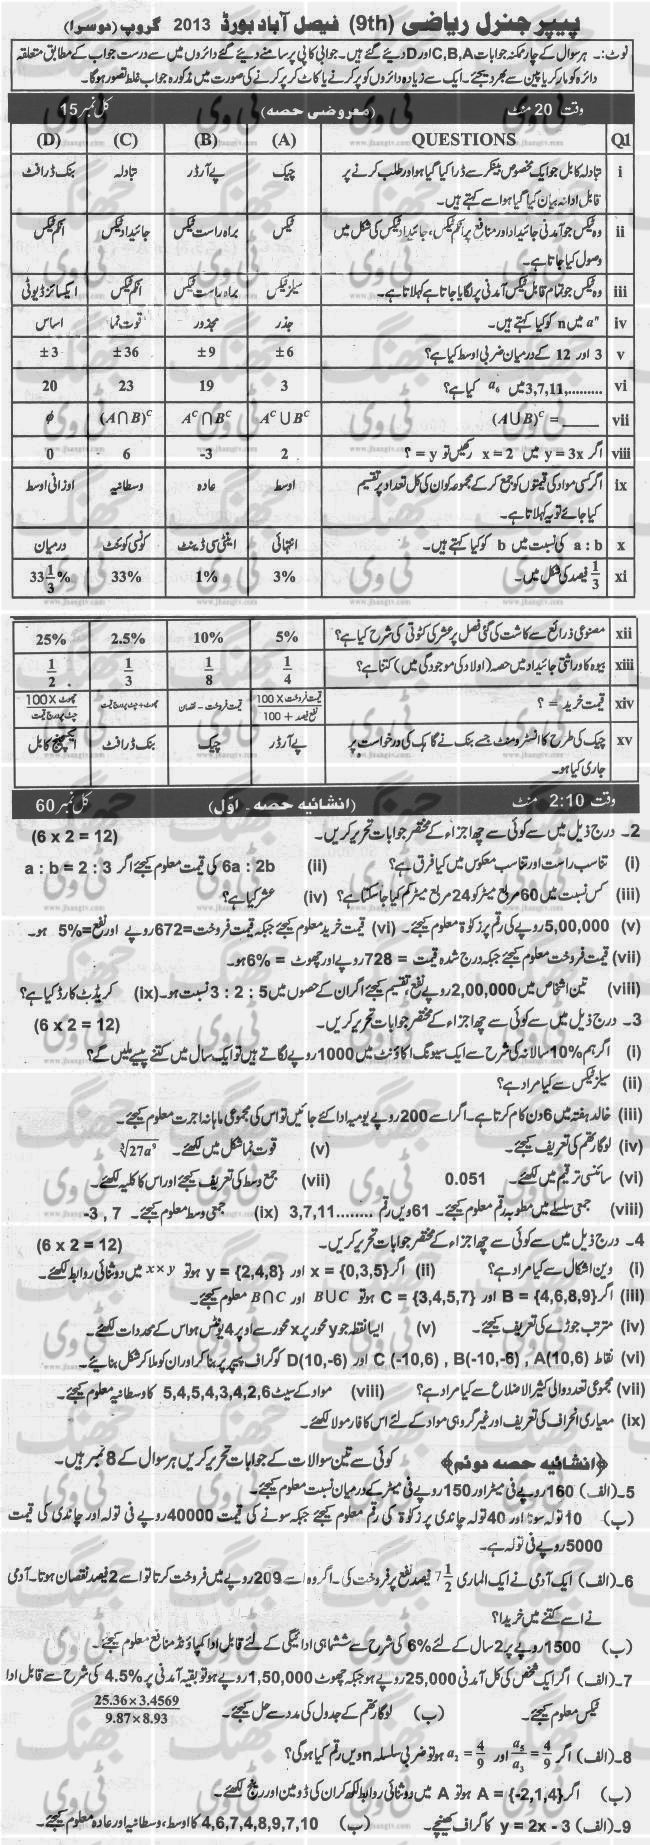 Past-Papers-2013-Faisalabad-Board-9th-Class-Mathematics-Group-2 copy